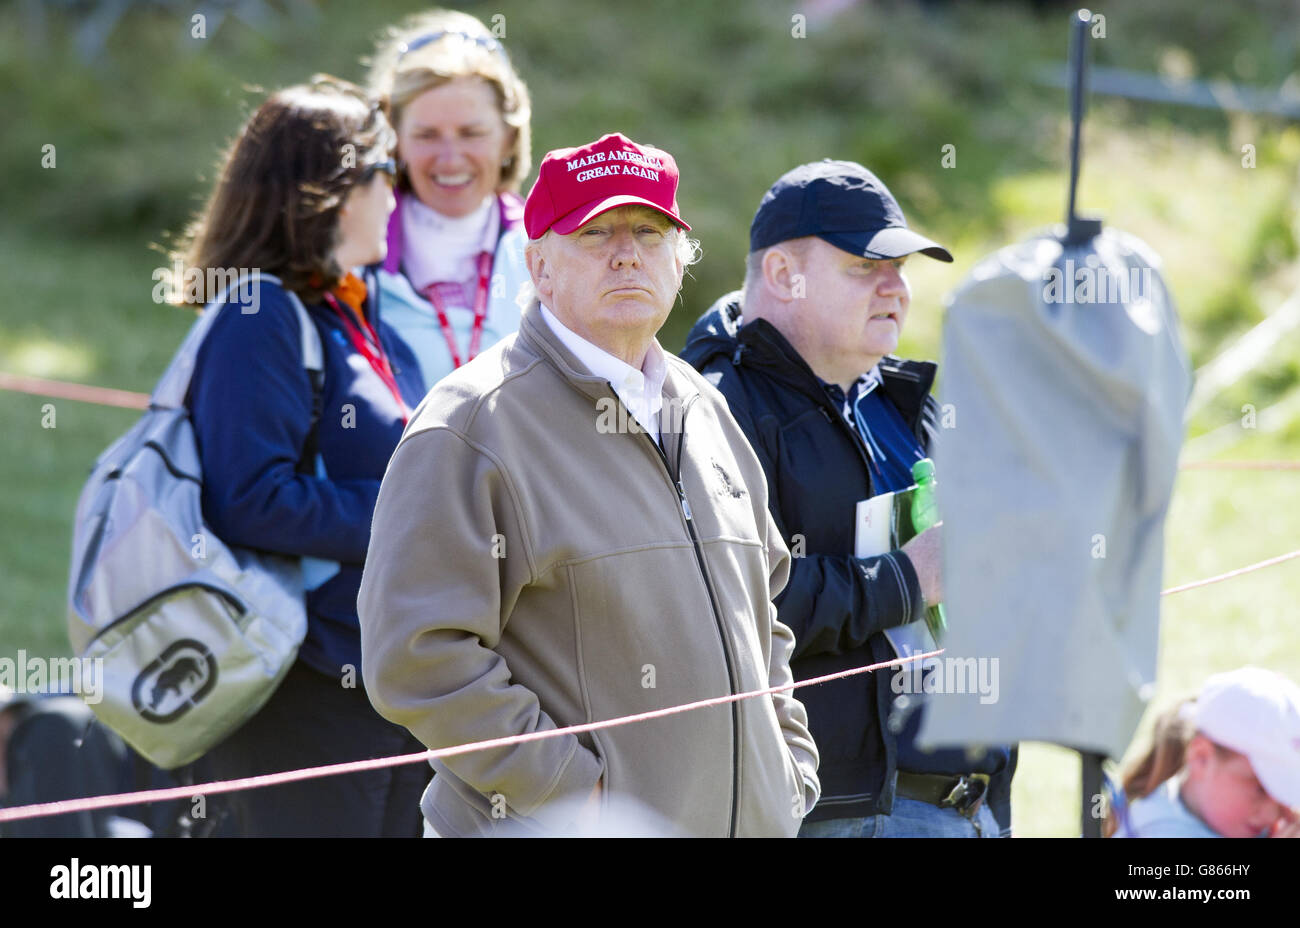 Donald Trump (centre) at his Trump Turnberry golf course in Ayrshire, which is hosting the Ricoh Women's British Open. Stock Photo